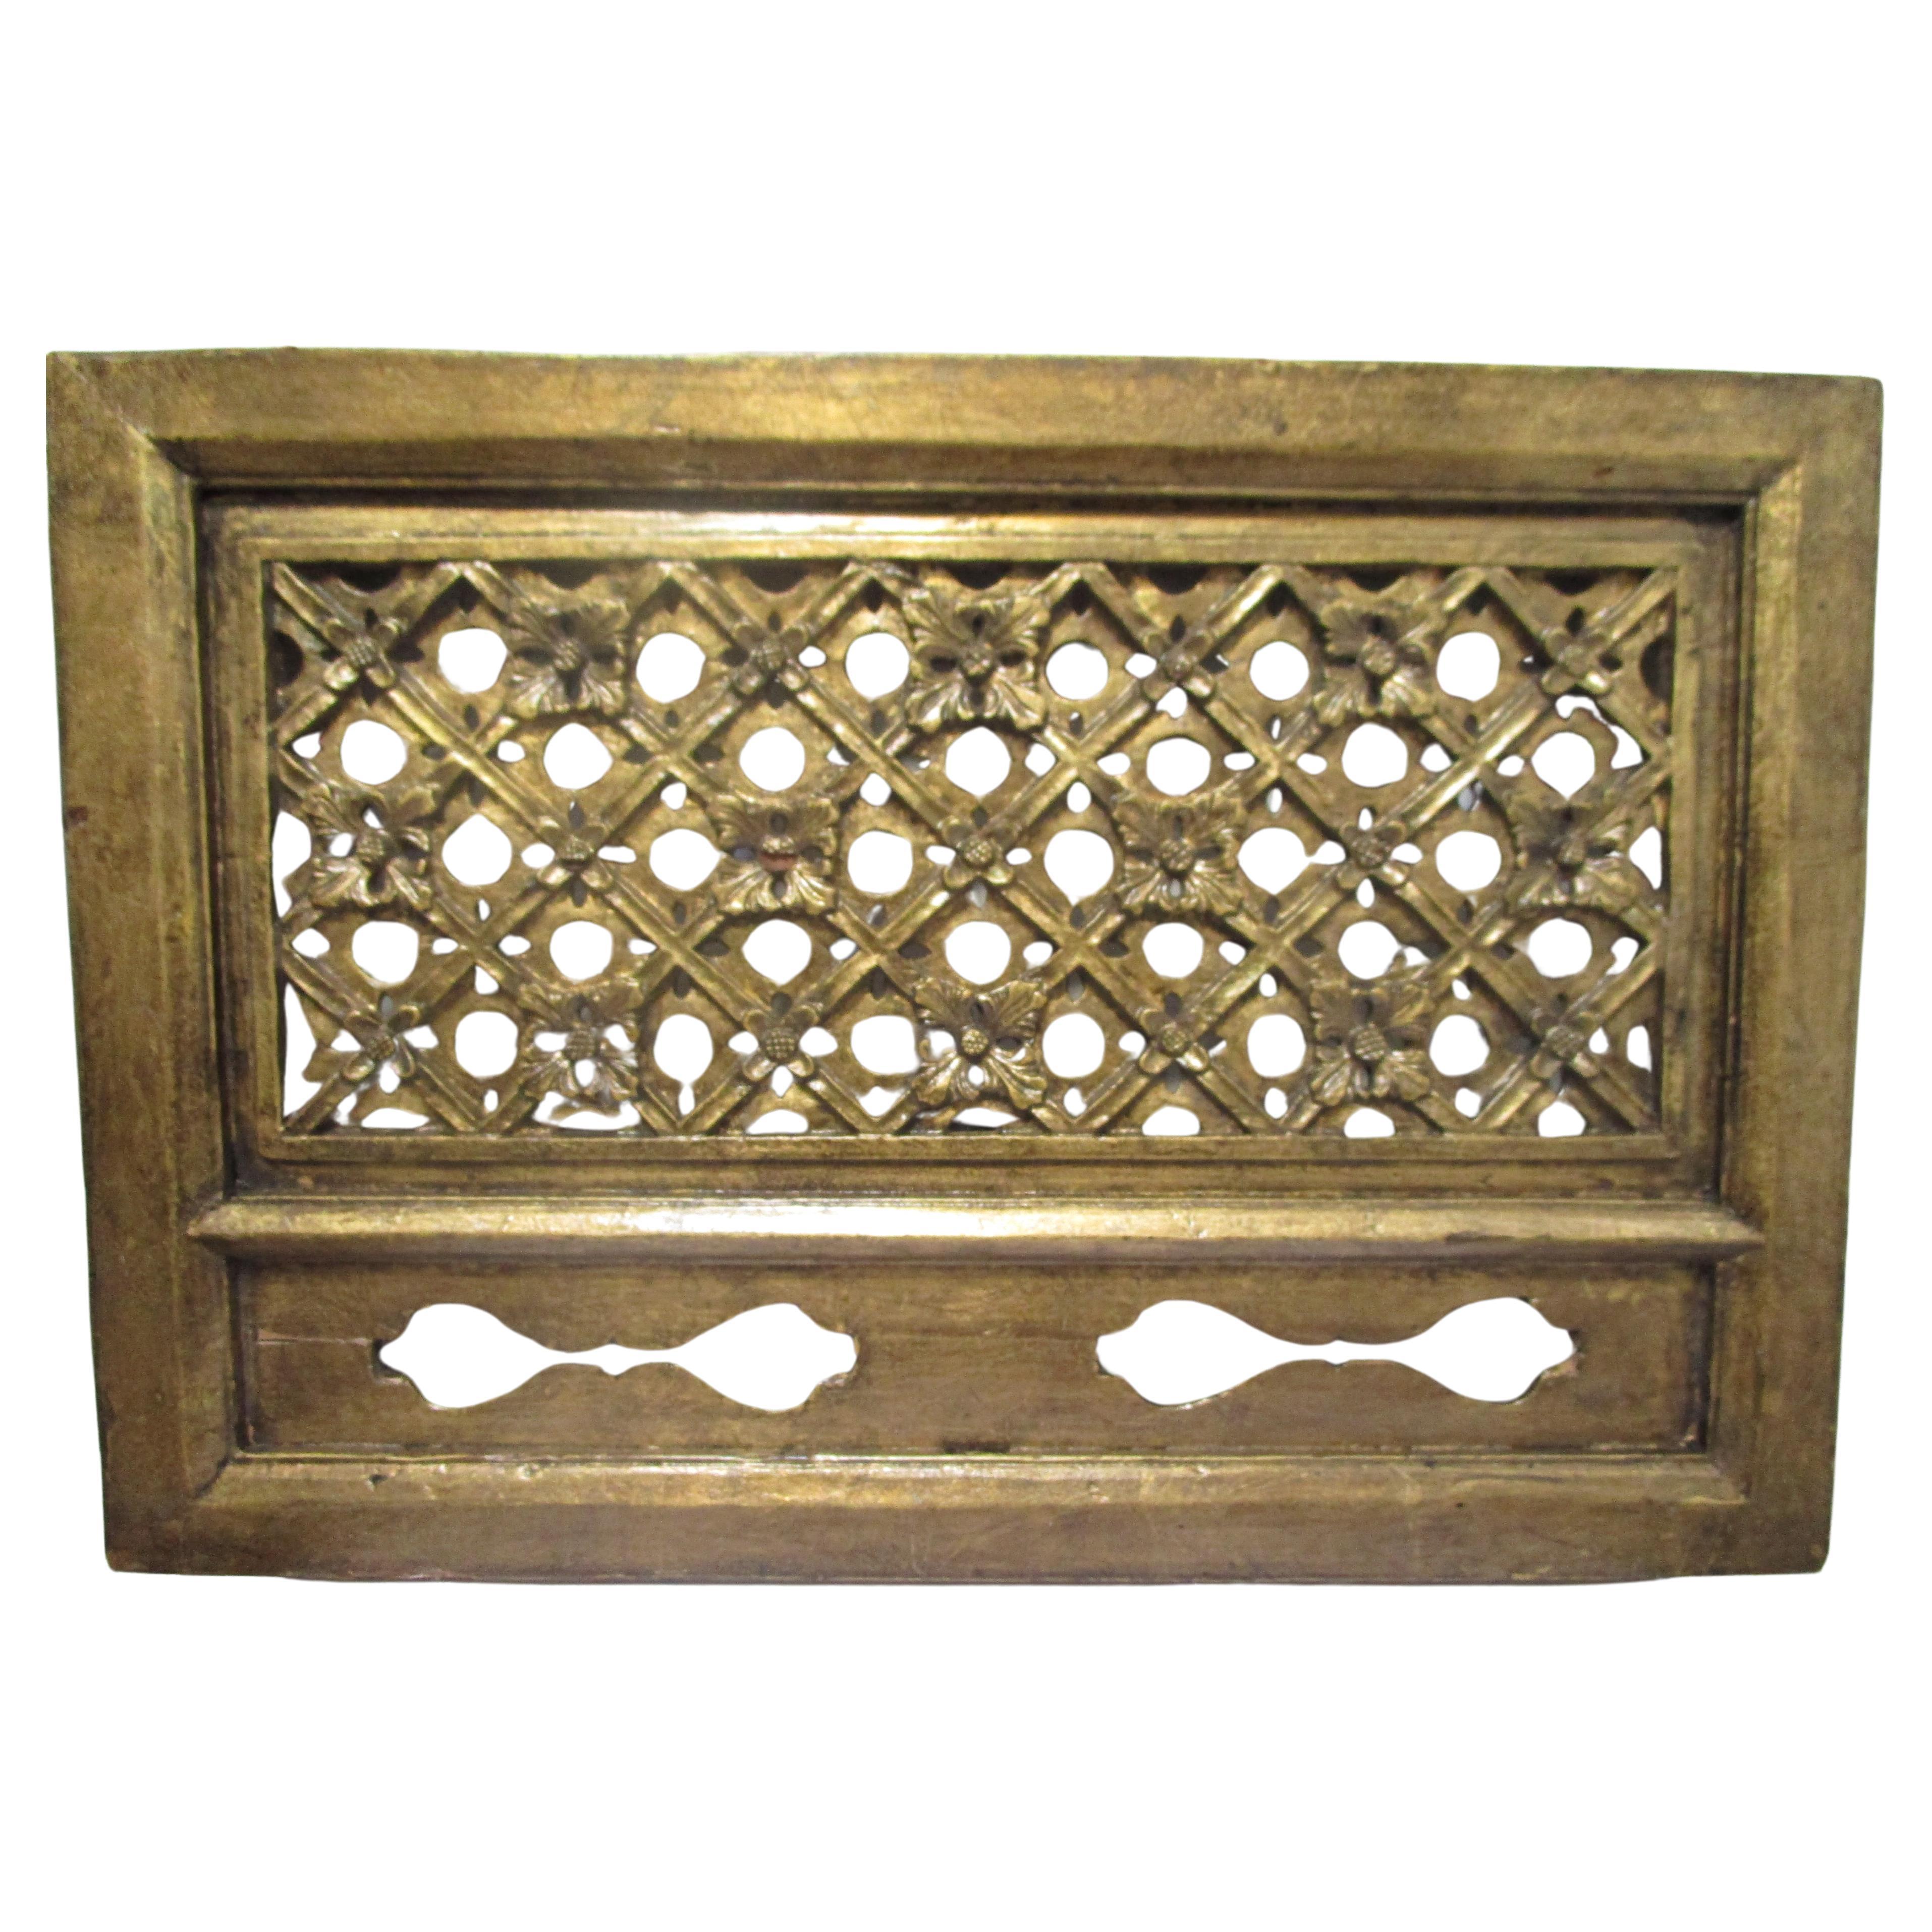 19th Century Architectural Carved Parcel Gilt Pierced Wood Panel, Europe or U.S. For Sale